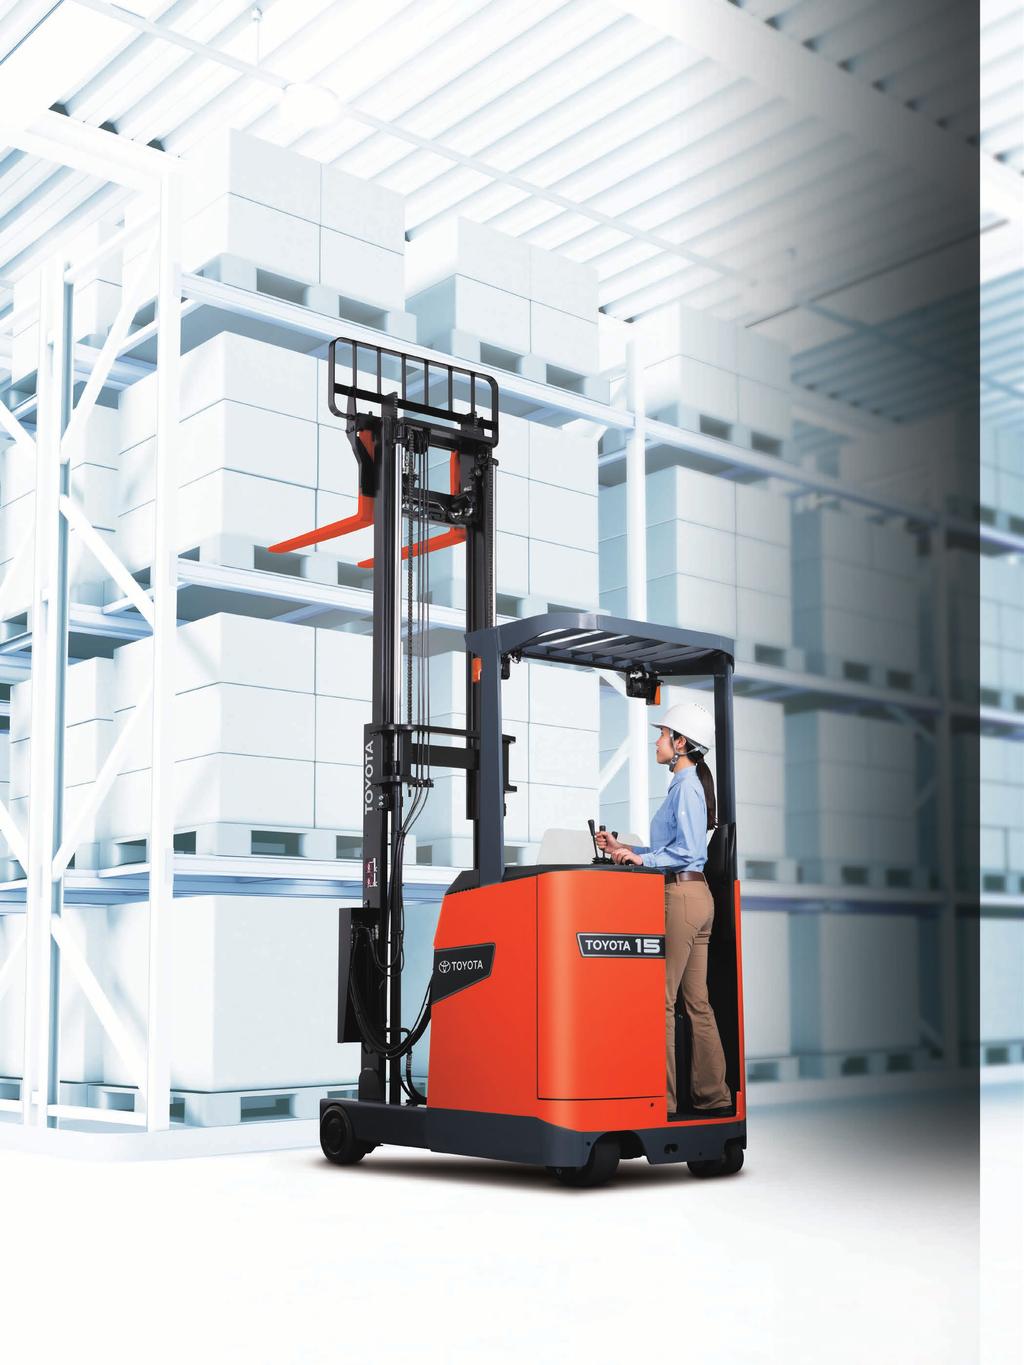 Outstanding Stability during Turns and Load Handling Supports Efficient Work.